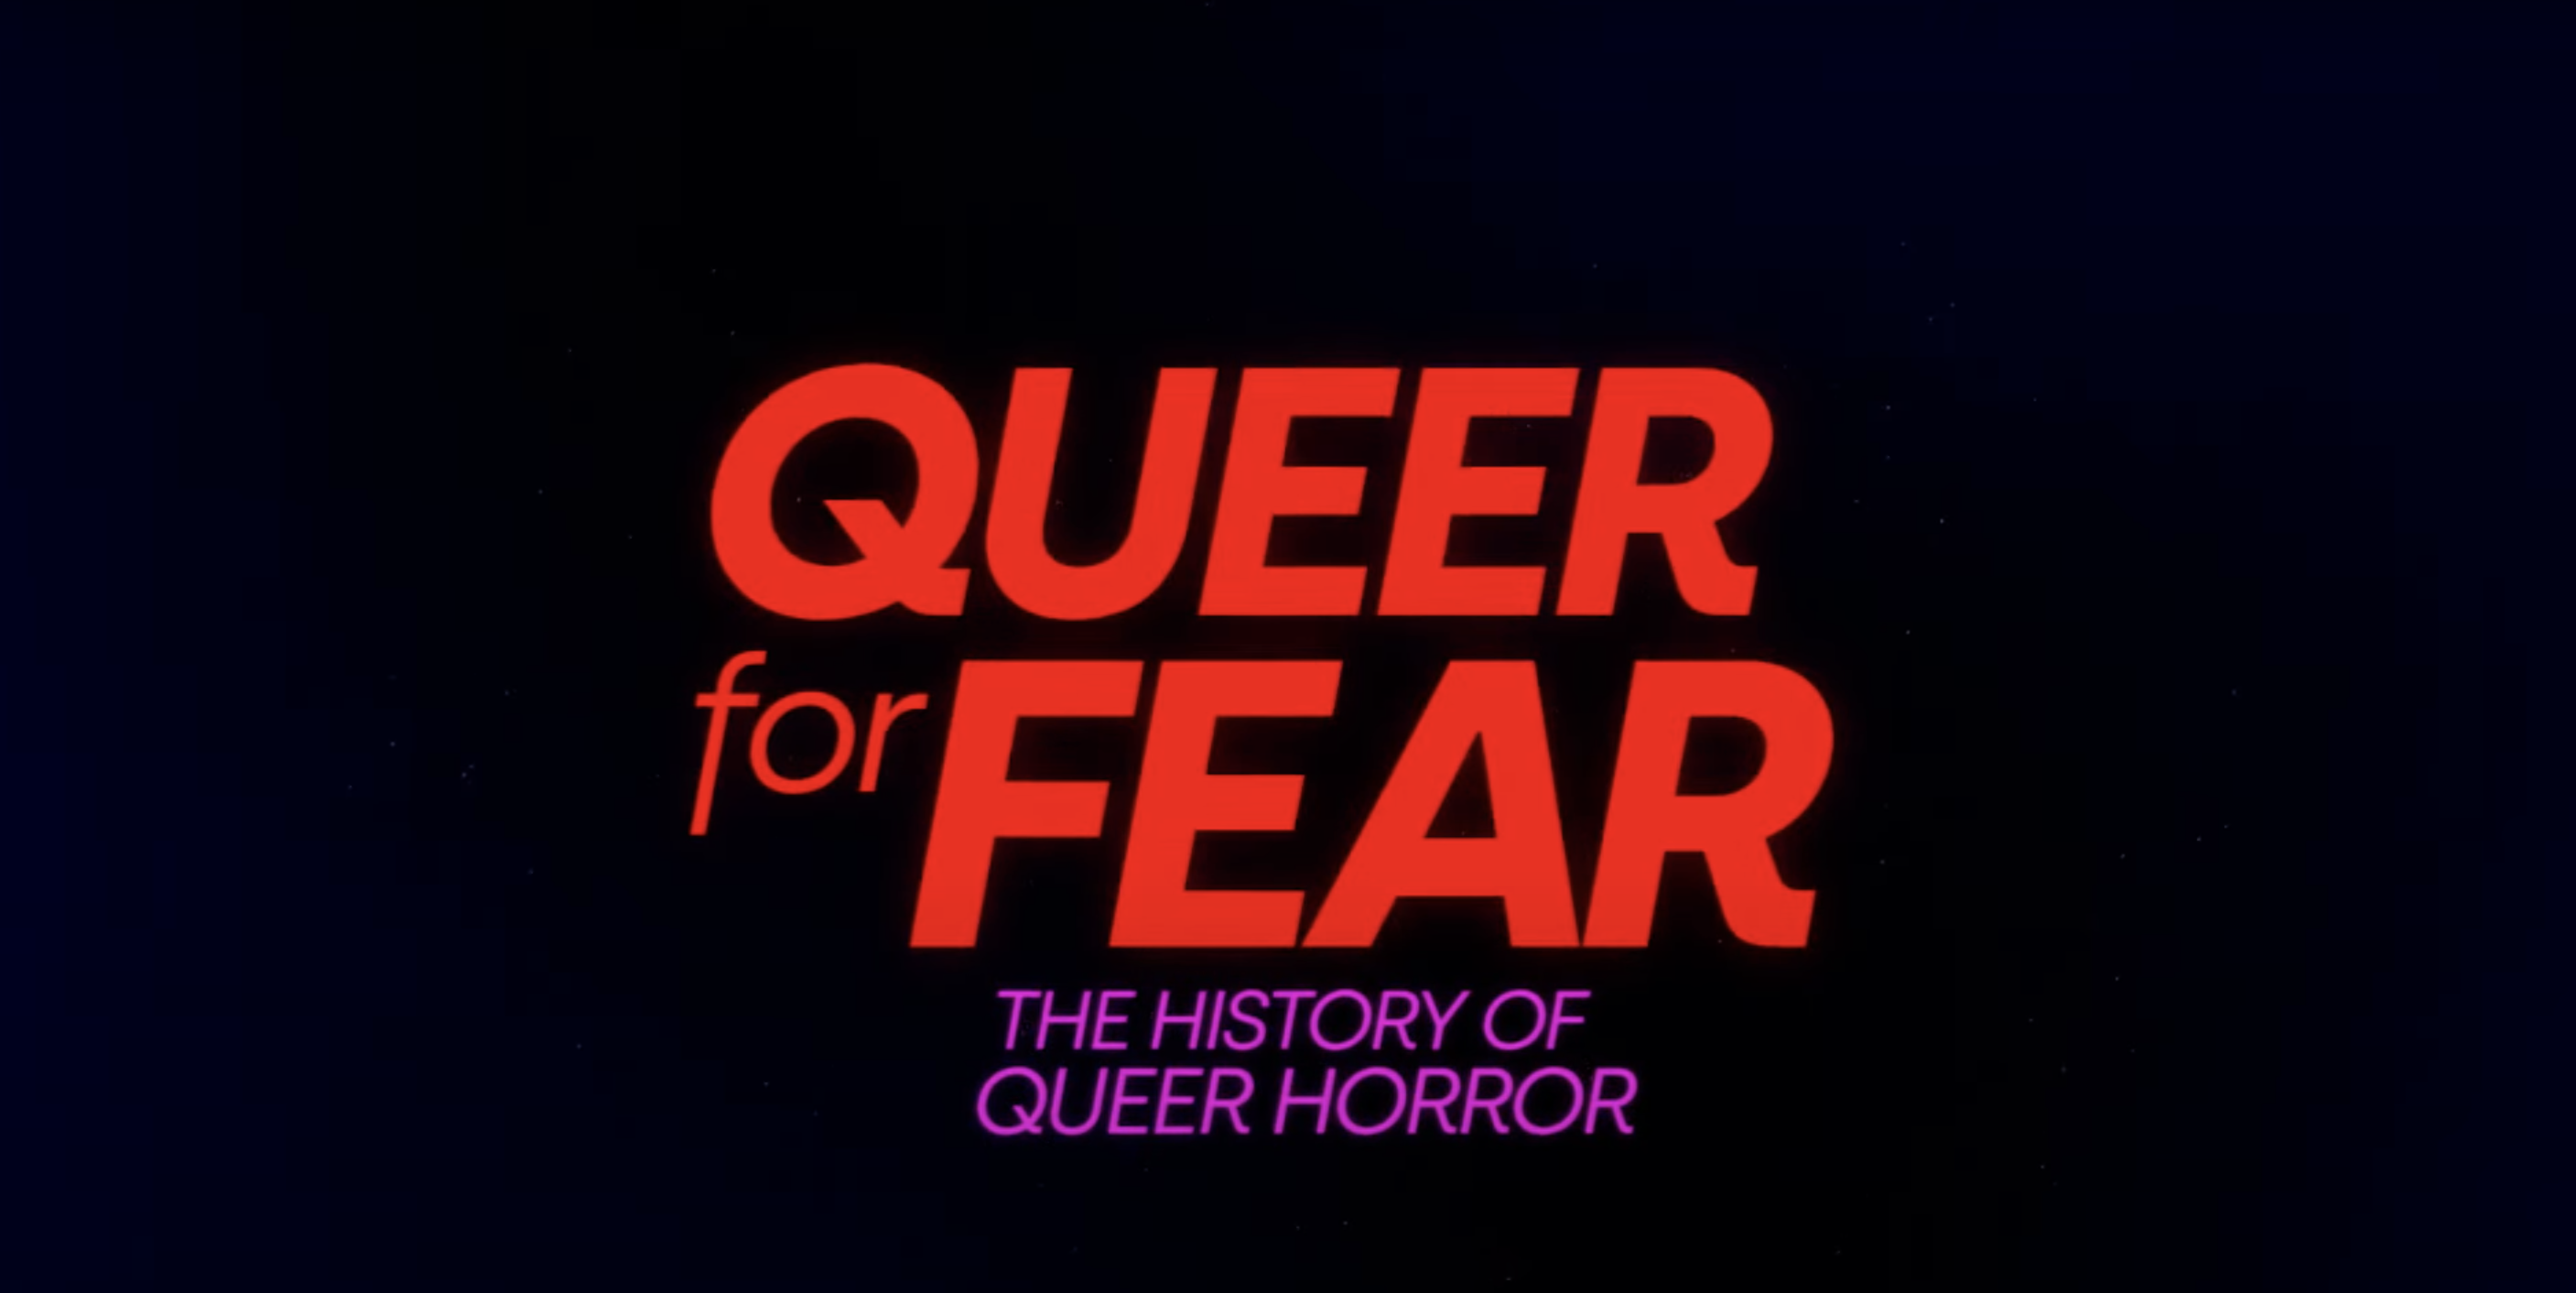 A title card for queer for fear.